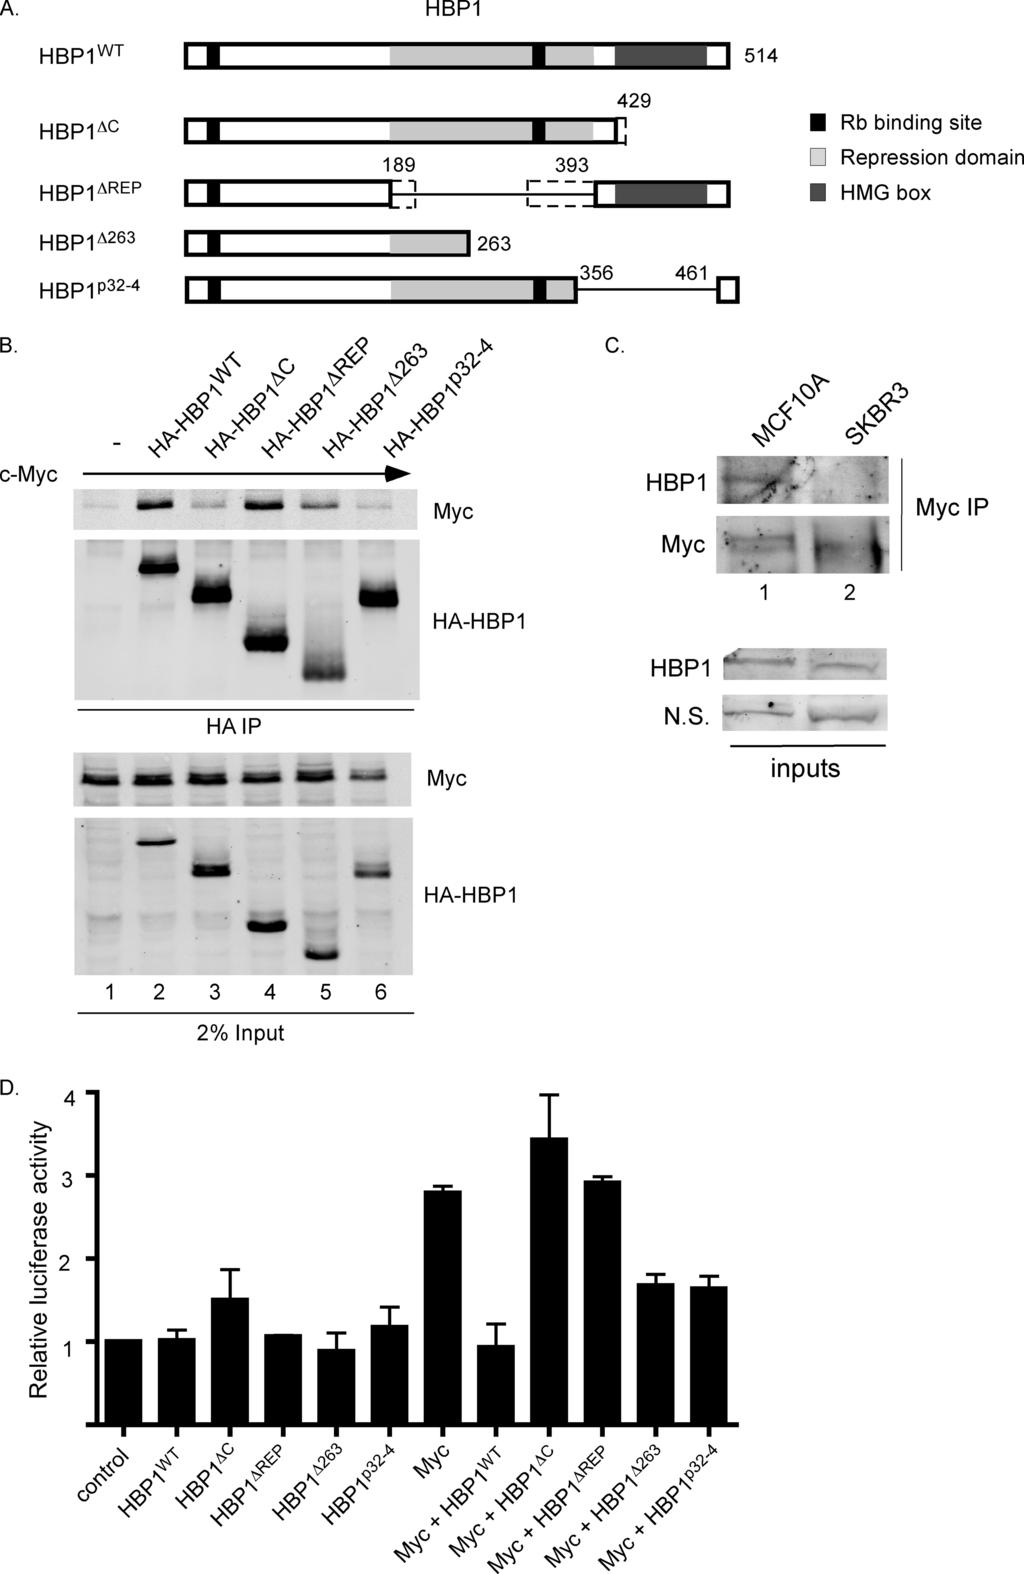 FIGURE 5. c-myc shows reduced binding to and/or altered activity in the presence of some HBP1 mutants. A, shown are schematics of HBP1 and HBP1 deletion mutants used in co-immunoprecipitations.